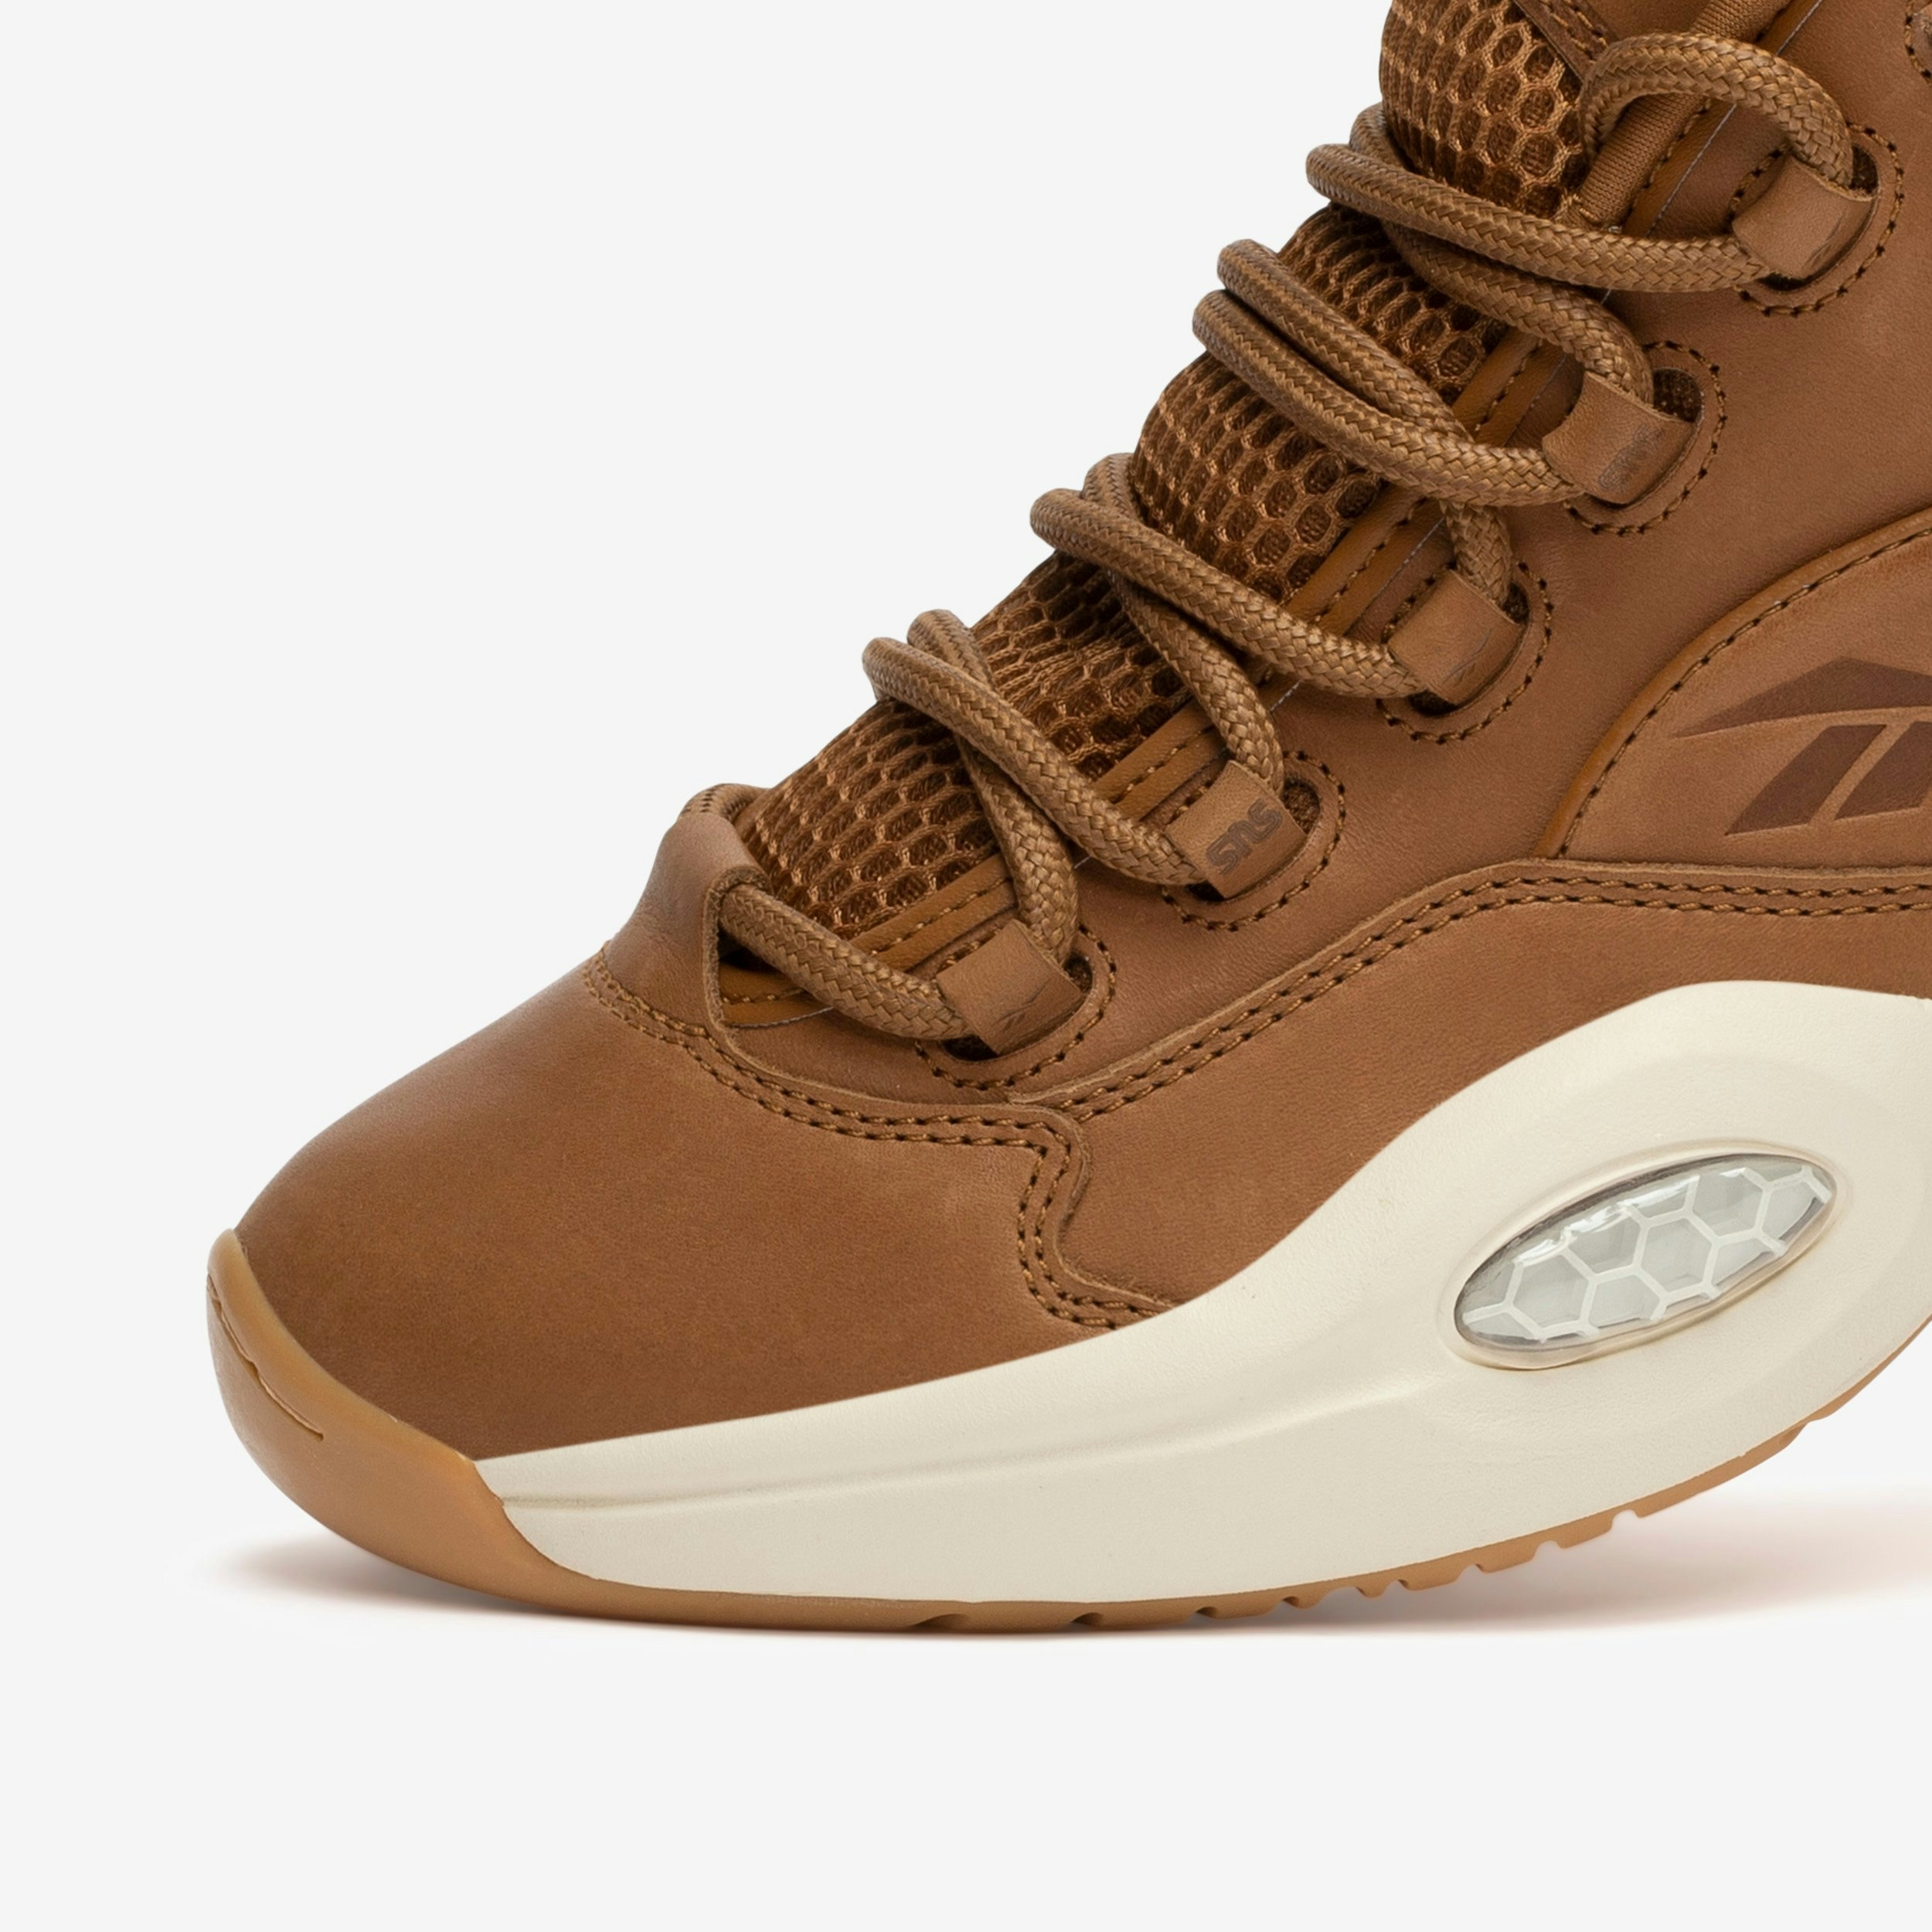 SNS x Reebok Question Mid "Leather Brown"